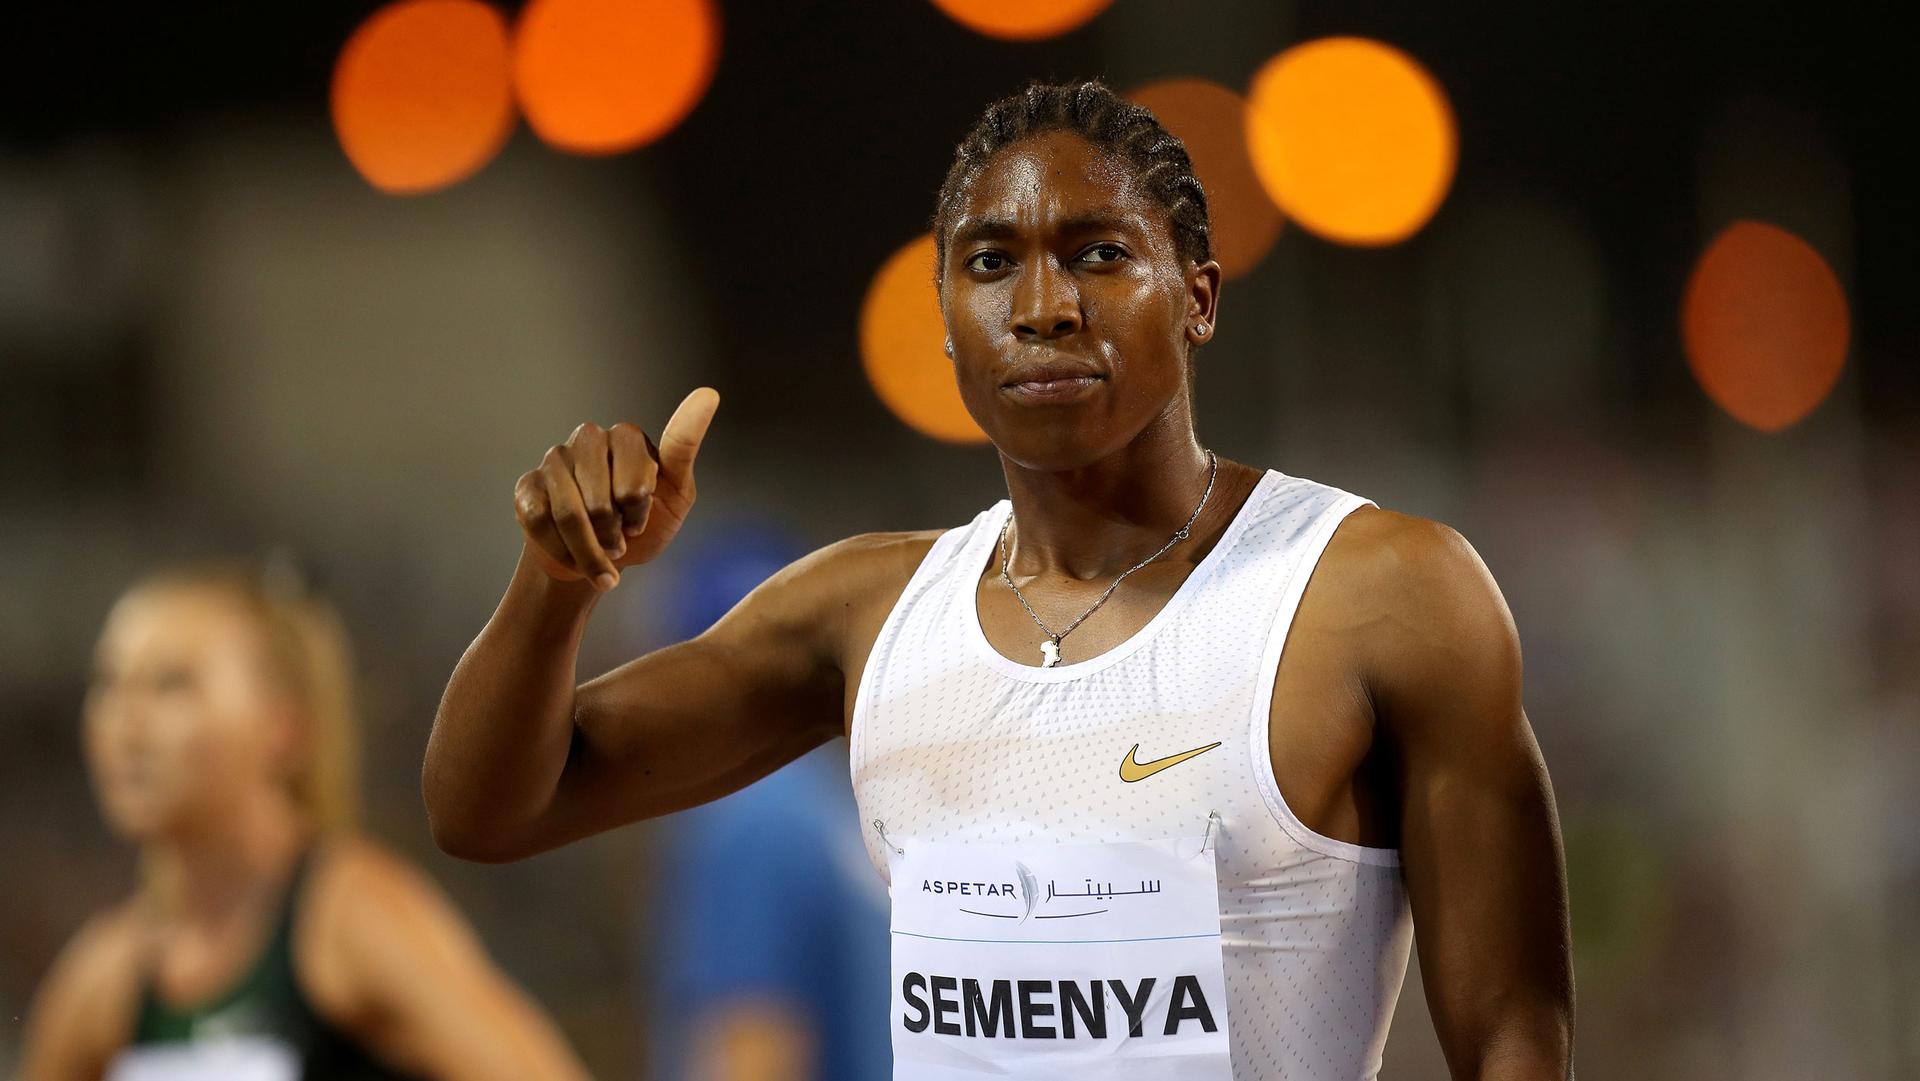 South Africa's Caster Semenya is shown wearing a white running singlet and a bib with "Semenya" printed on it.